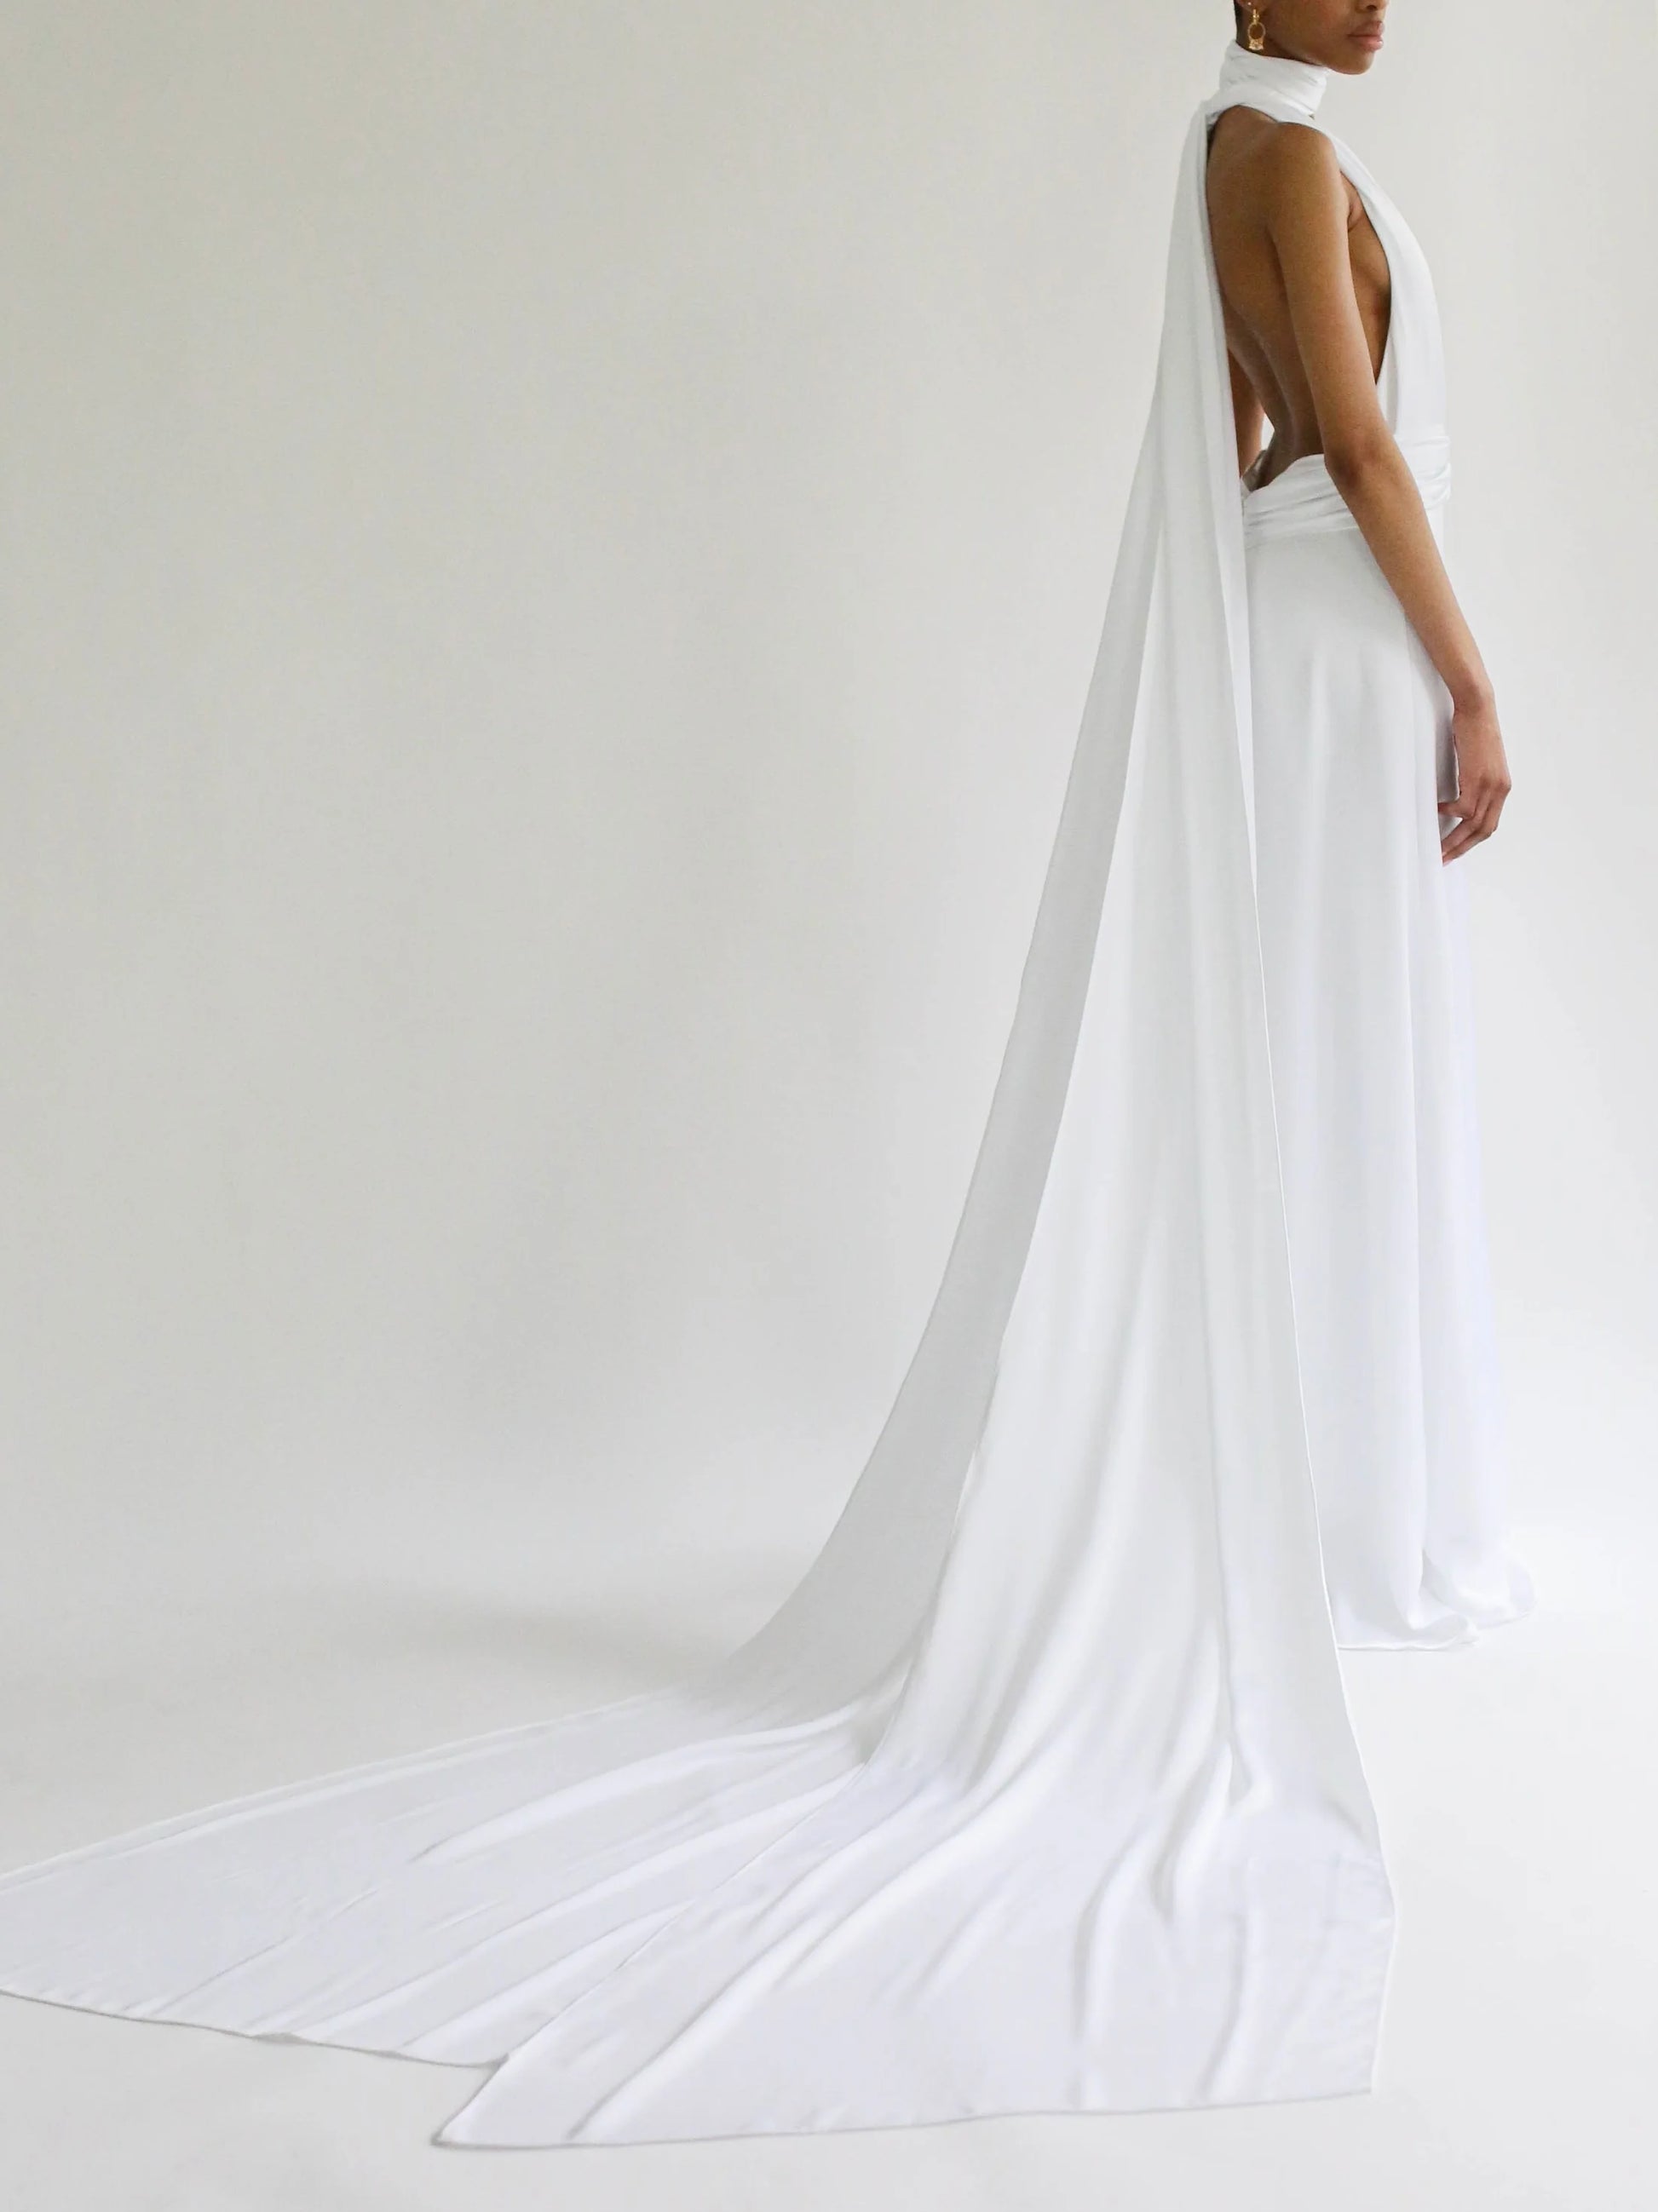 For brides wanting to feel like a fashion goddess on their wedding days